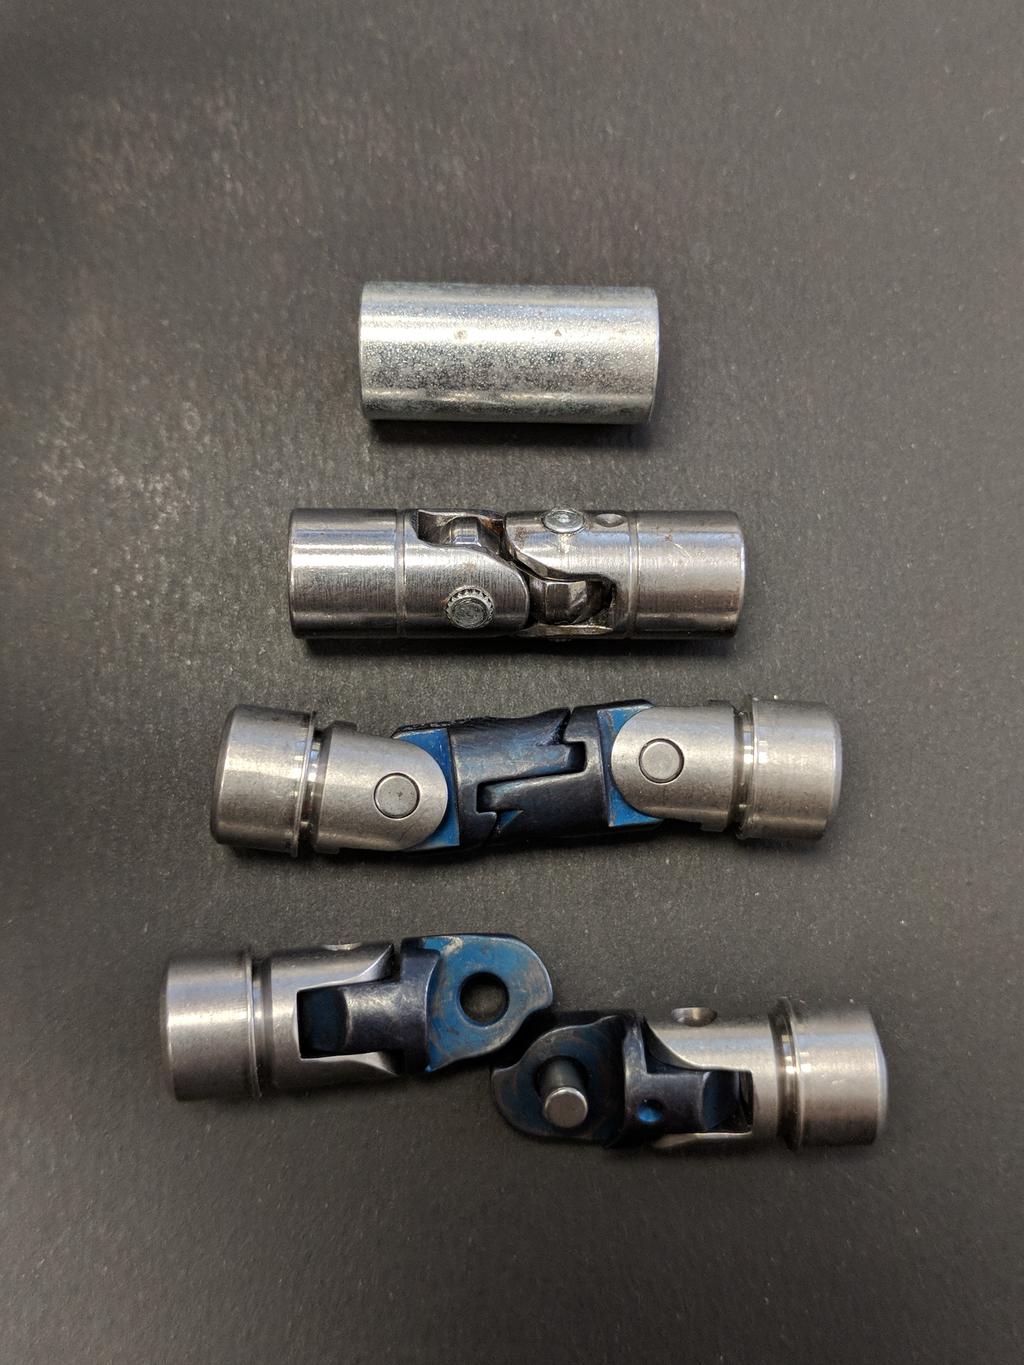 Connector Types There are various types of connections available from pre-made continuous loops, to crimped connections that can be made onsite with specialized crimping tools.